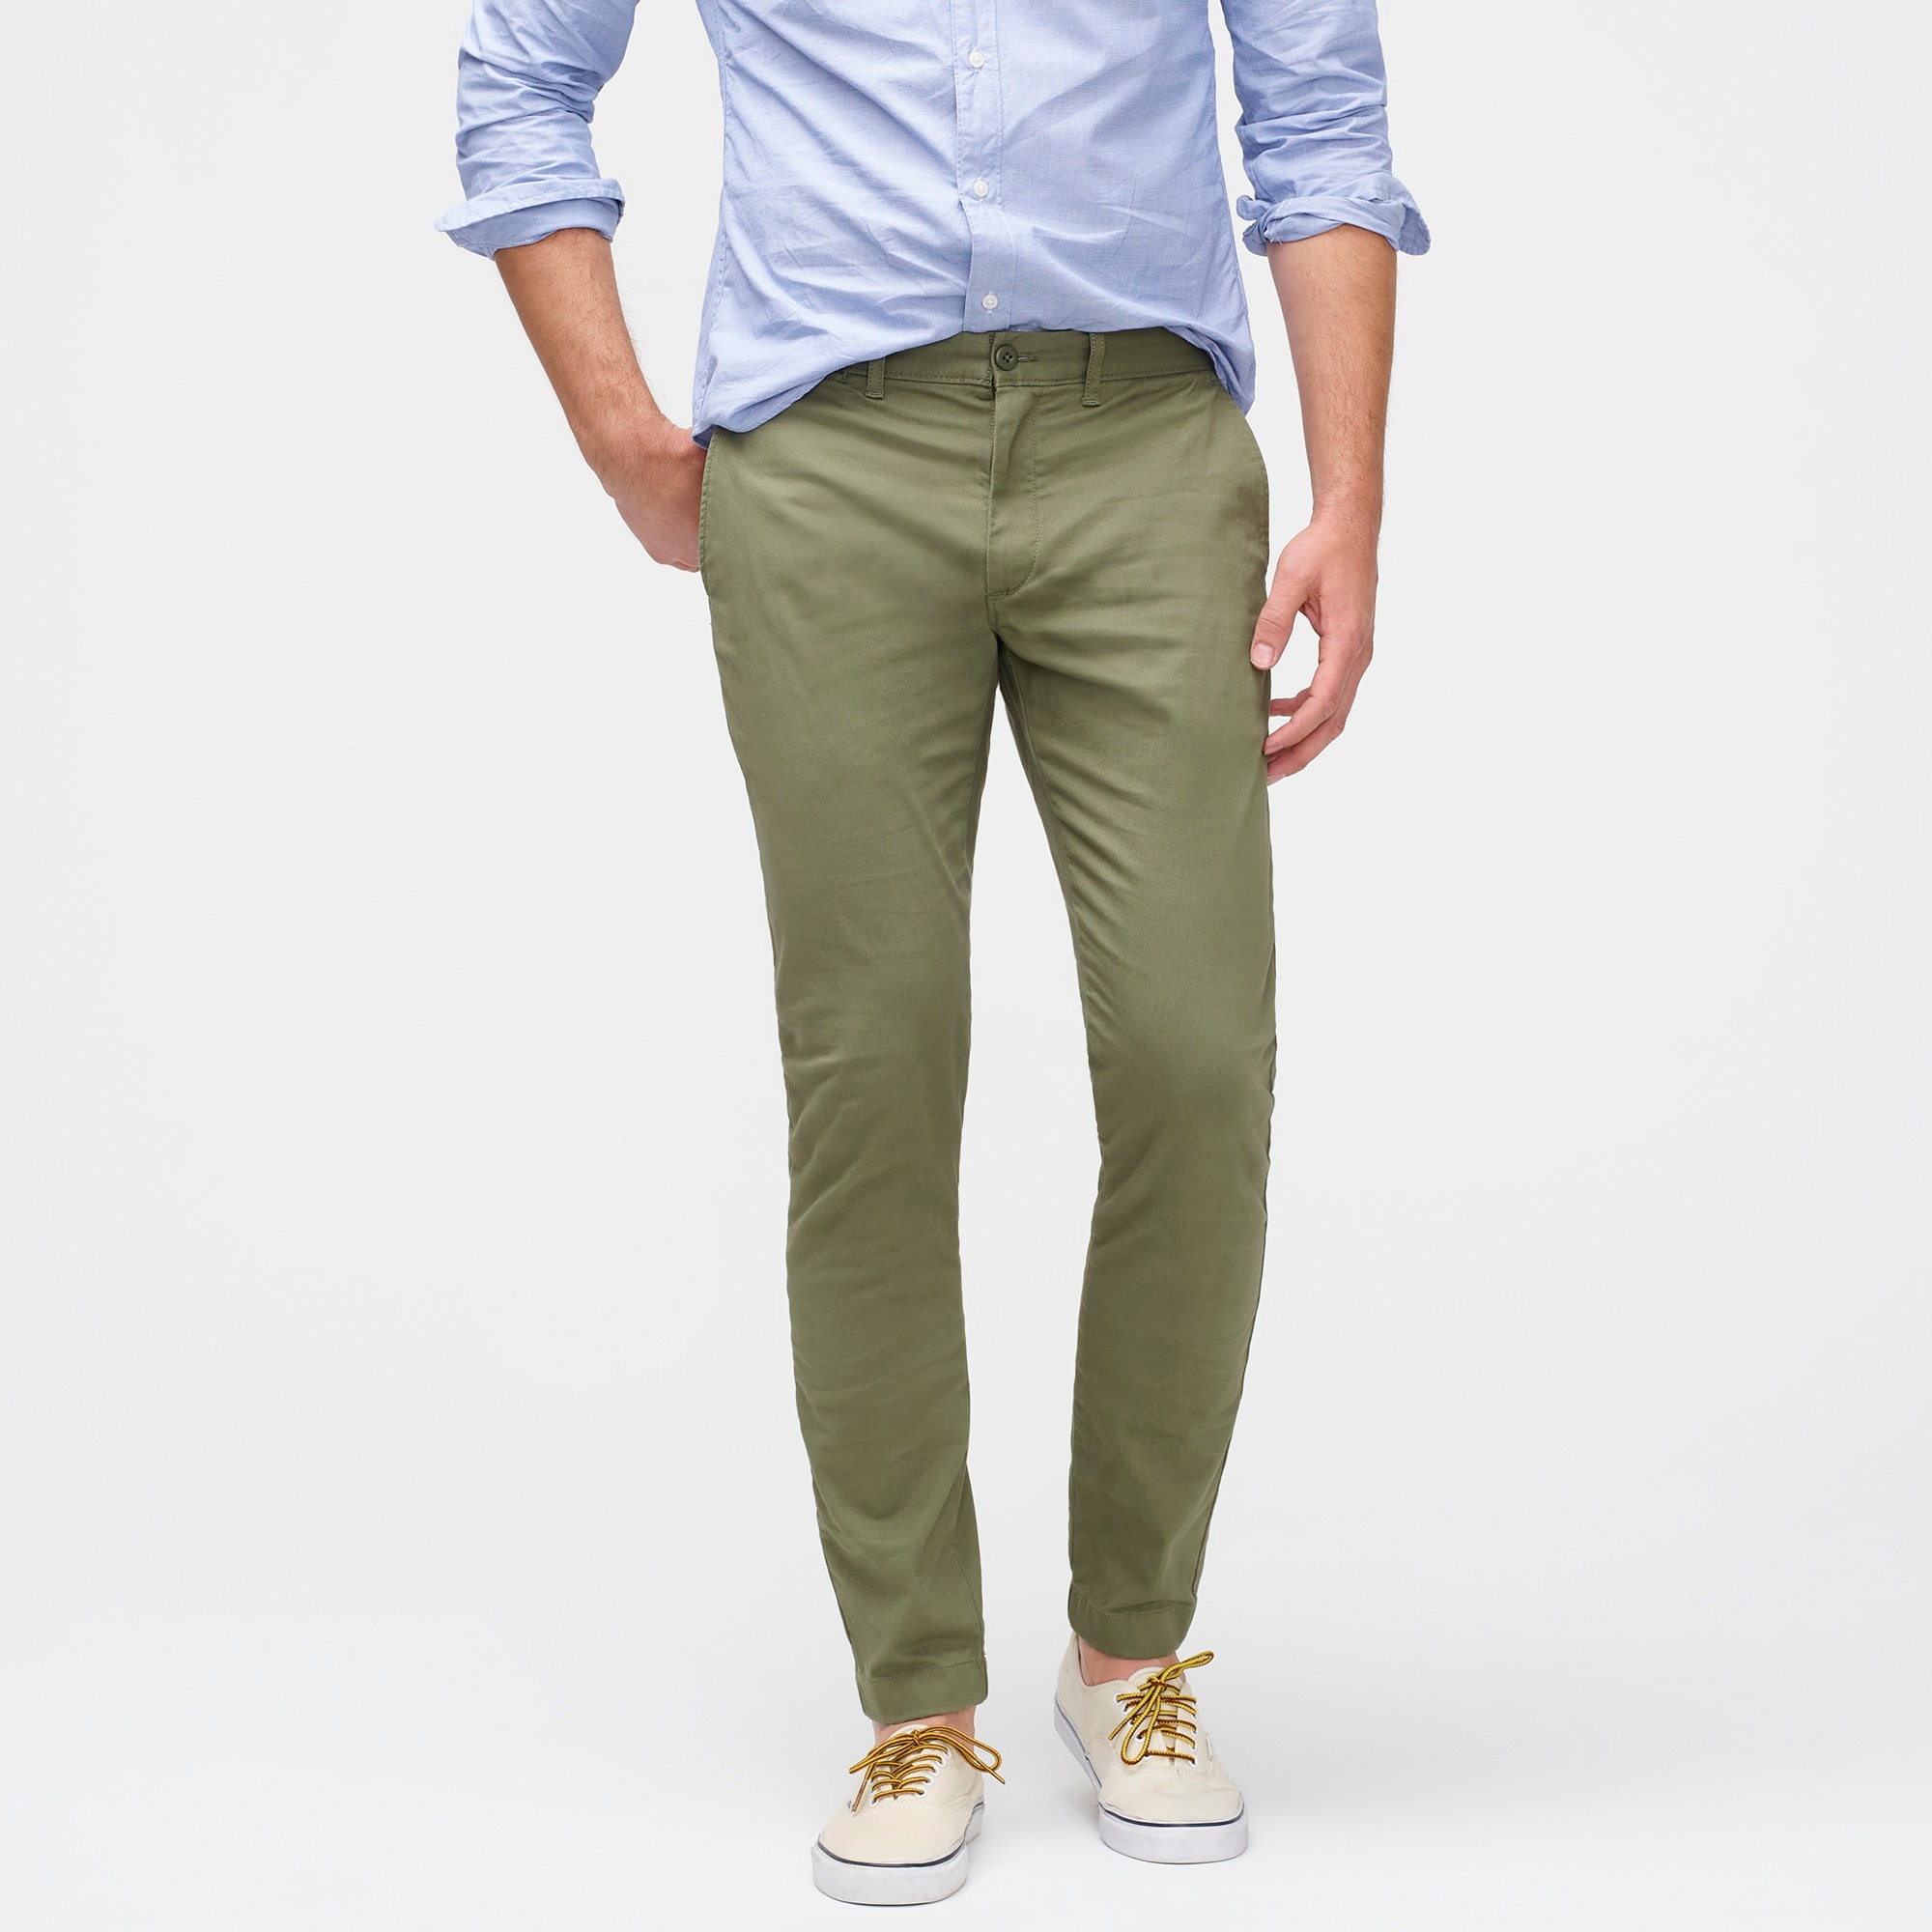 J.Crew250 Skinny-fit pant in stretch chino | DailyMail